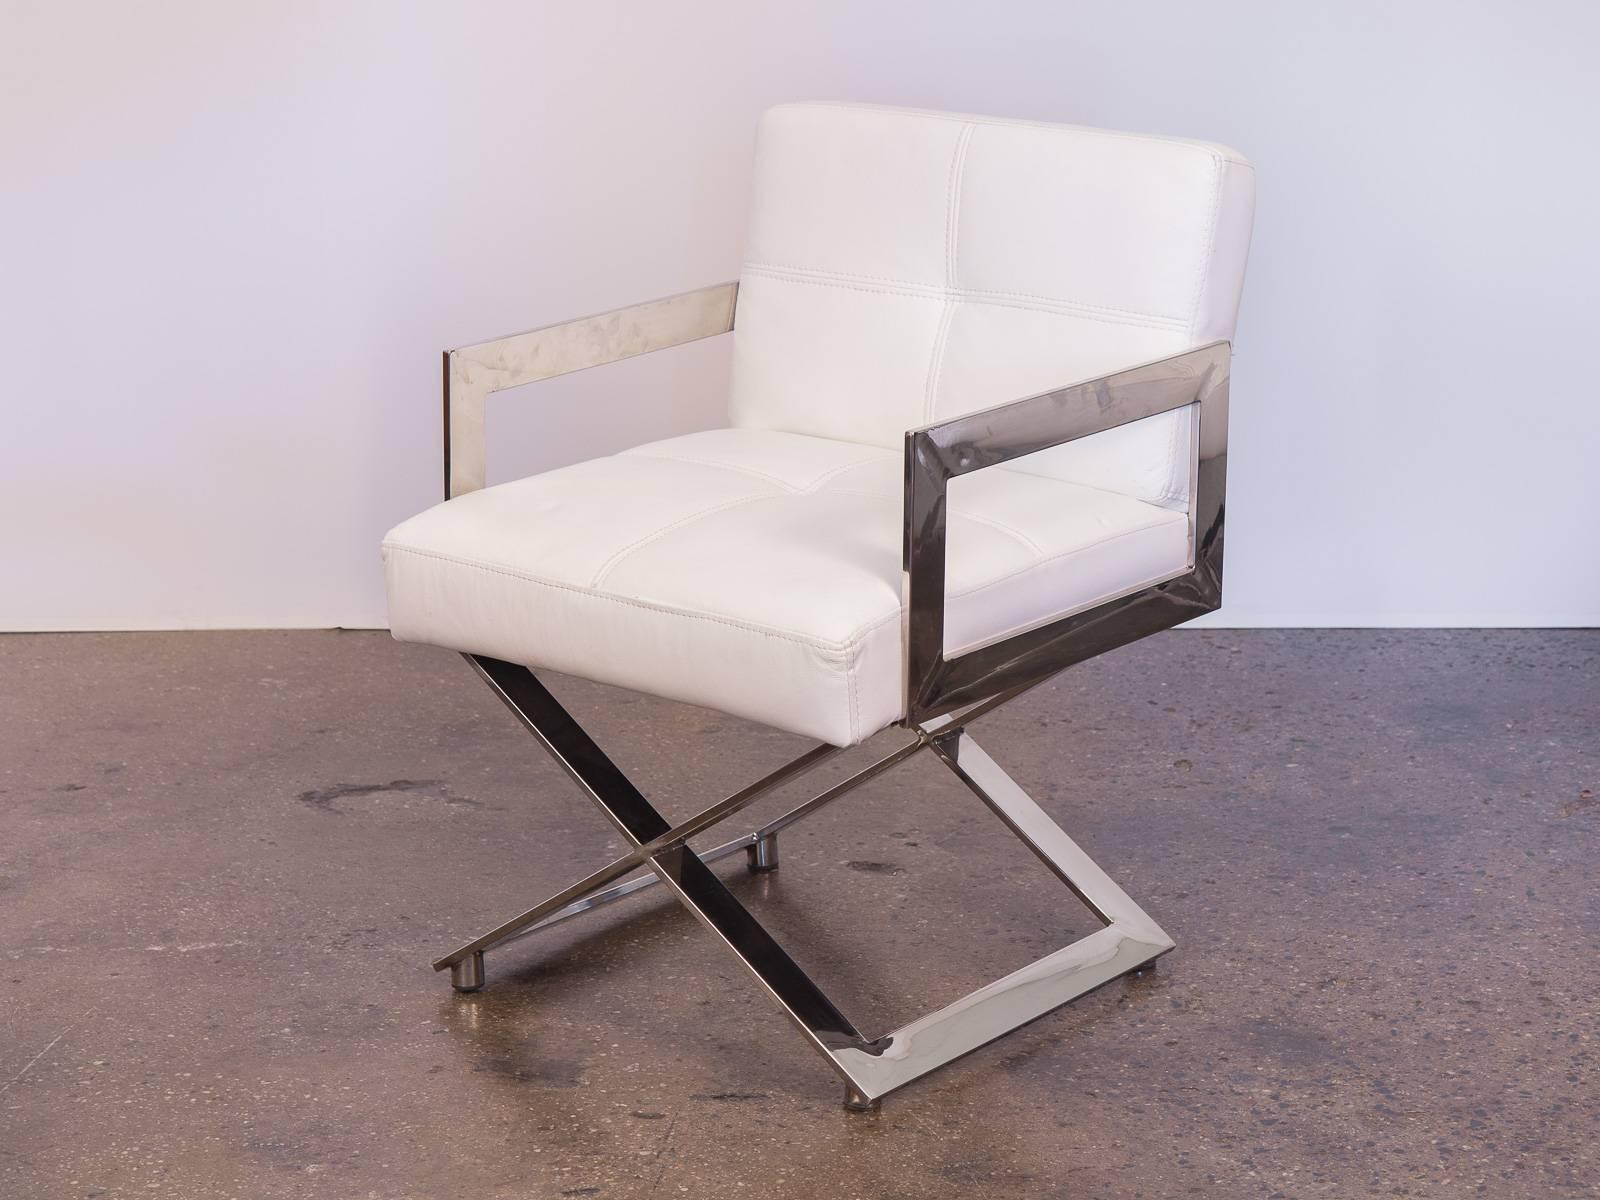 Set of ten Milo Baughman style chrome dining chairs. In excellent vintage condition, the white leather is very clean, with no rips or stains consistent throughout all the chairs. Impressive around a dining table or in an office.

Individual chairs